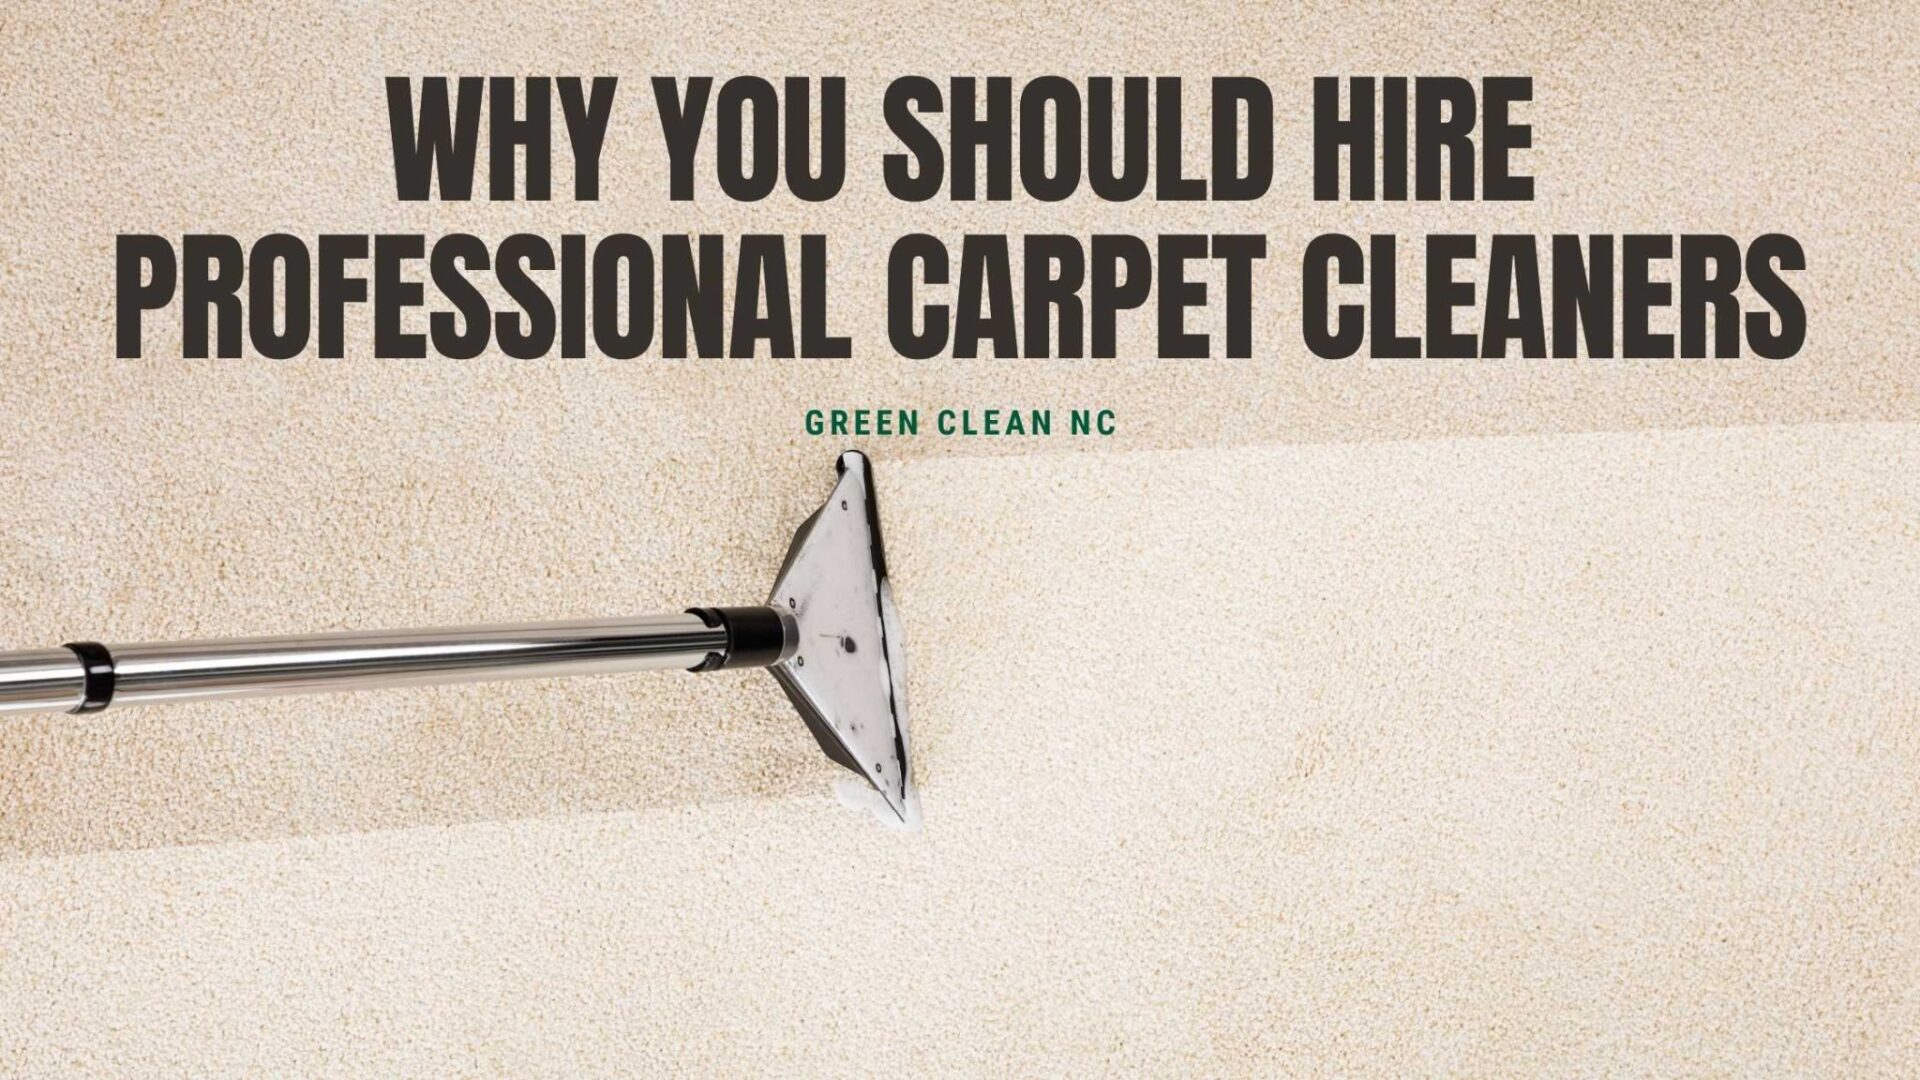 Why You Should Hire Professional Carpet Cleaners